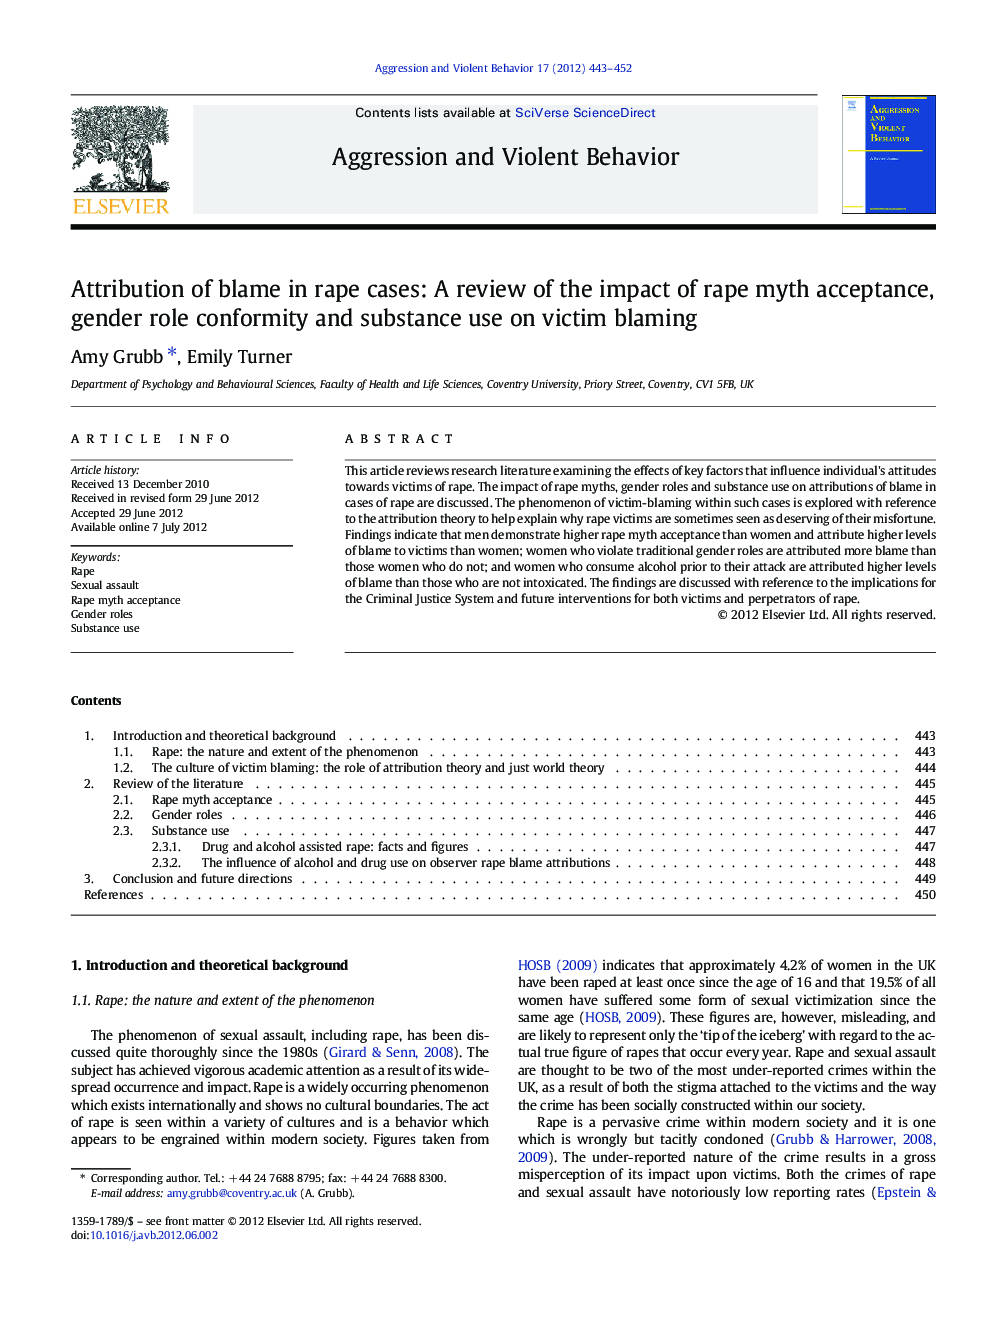 Attribution of blame in rape cases: A review of the impact of rape myth acceptance, gender role conformity and substance use on victim blaming